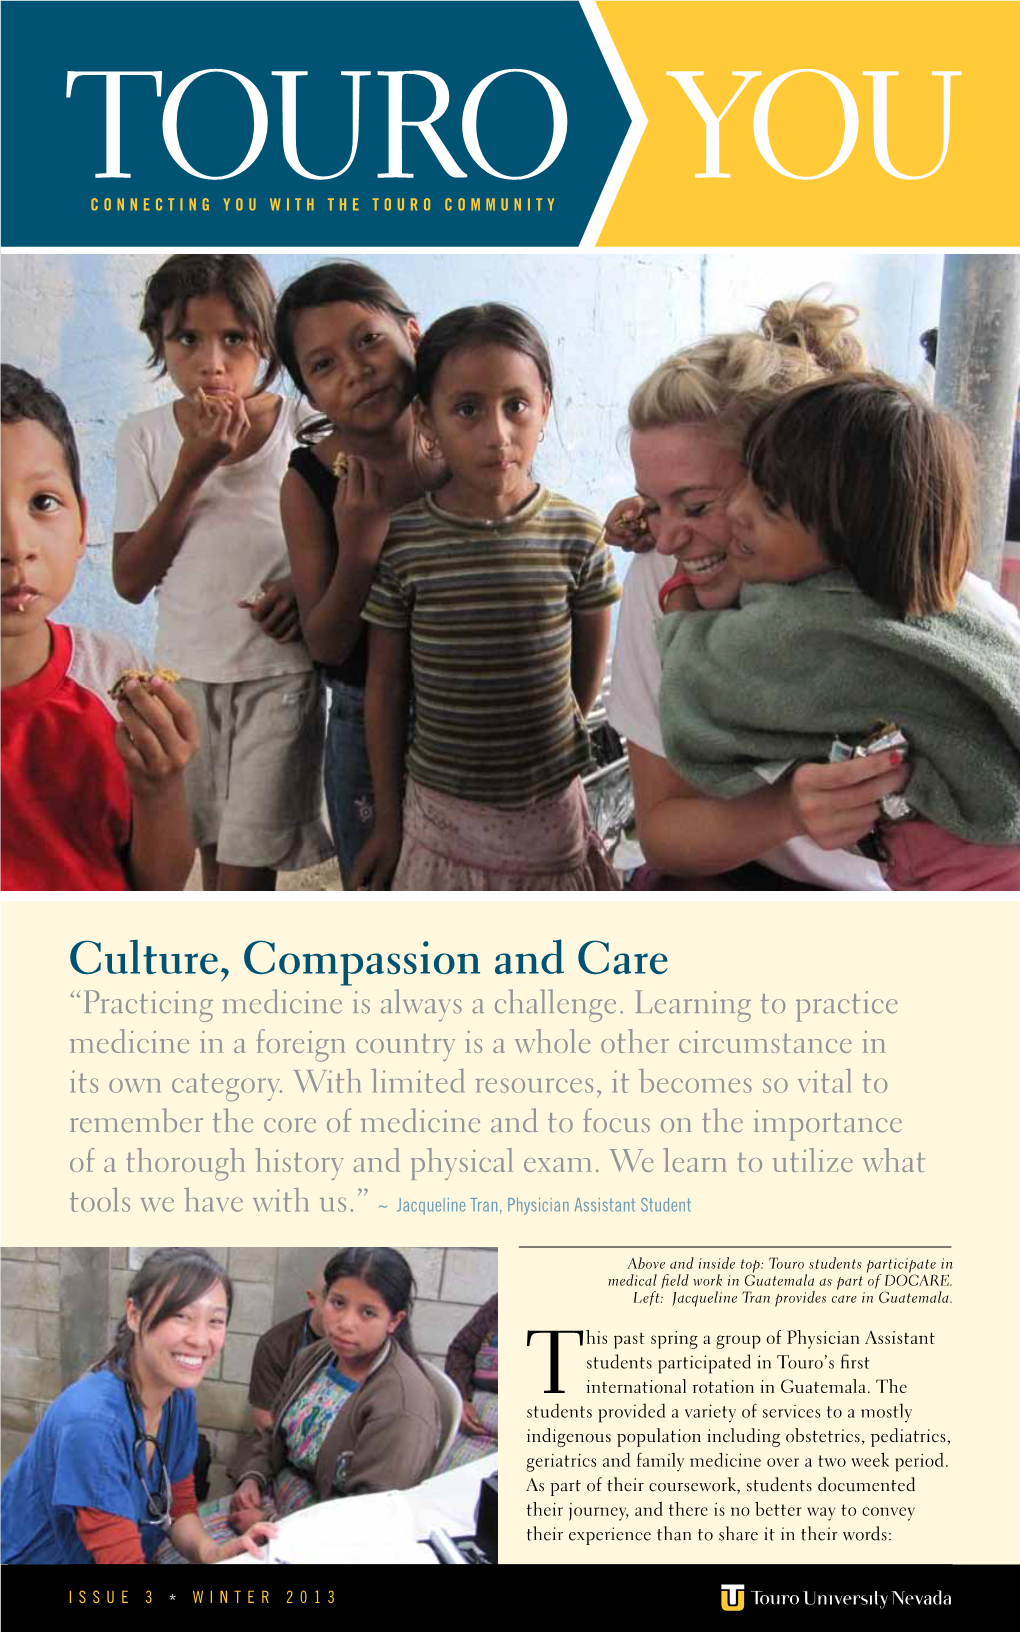 Culture, Compassion and Care “Practicing Medicine Is Always a Challenge